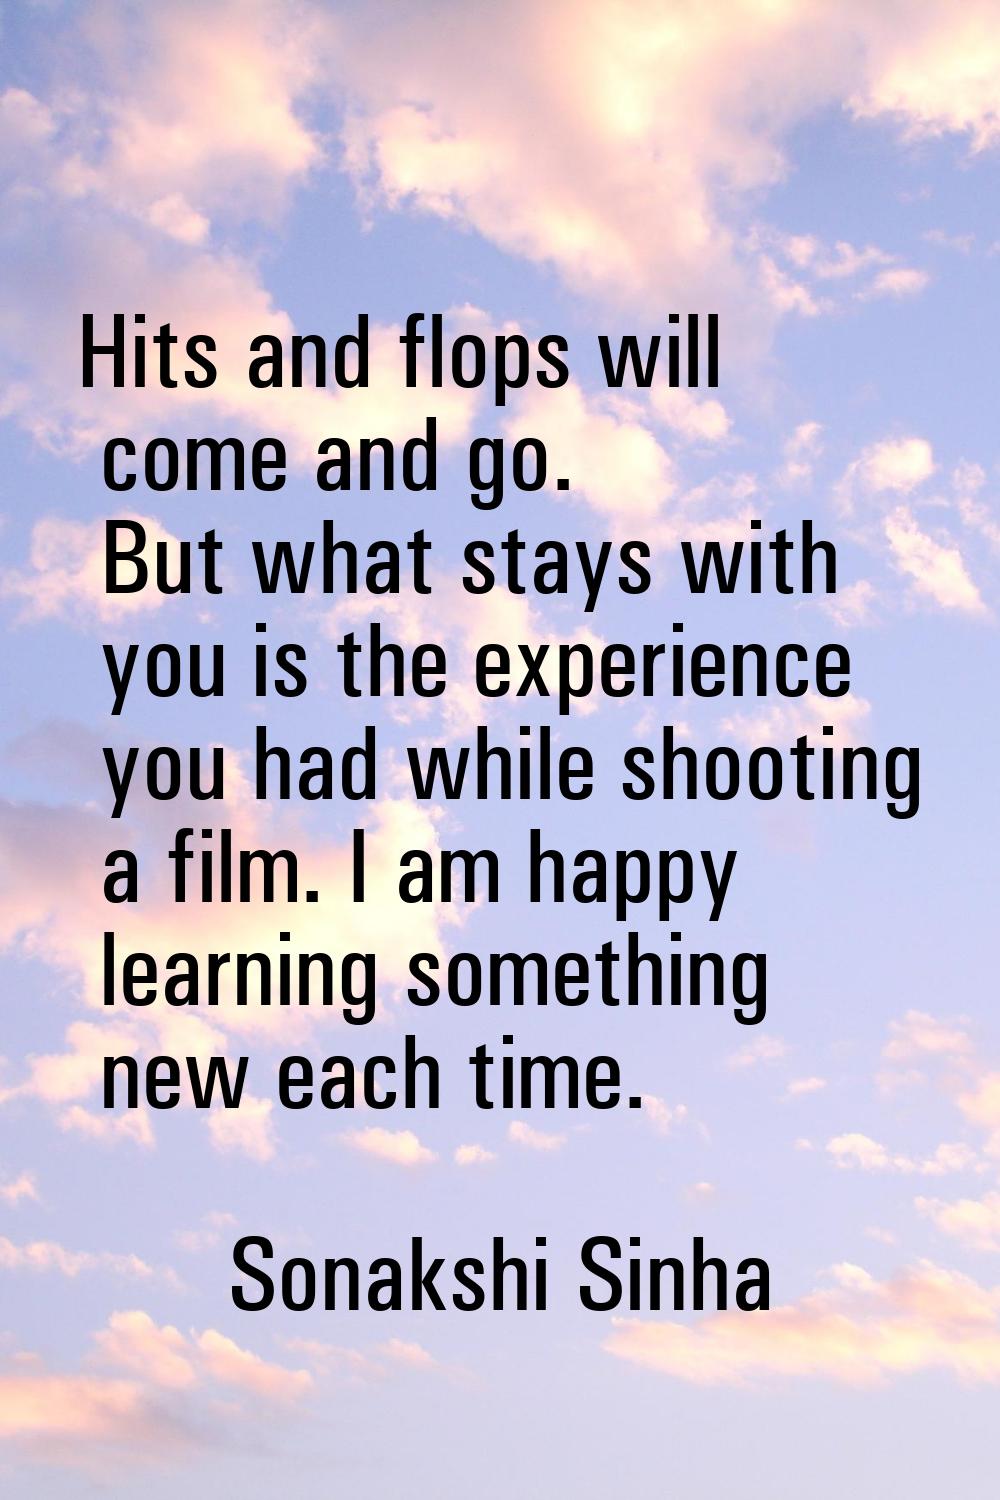 Hits and flops will come and go. But what stays with you is the experience you had while shooting a